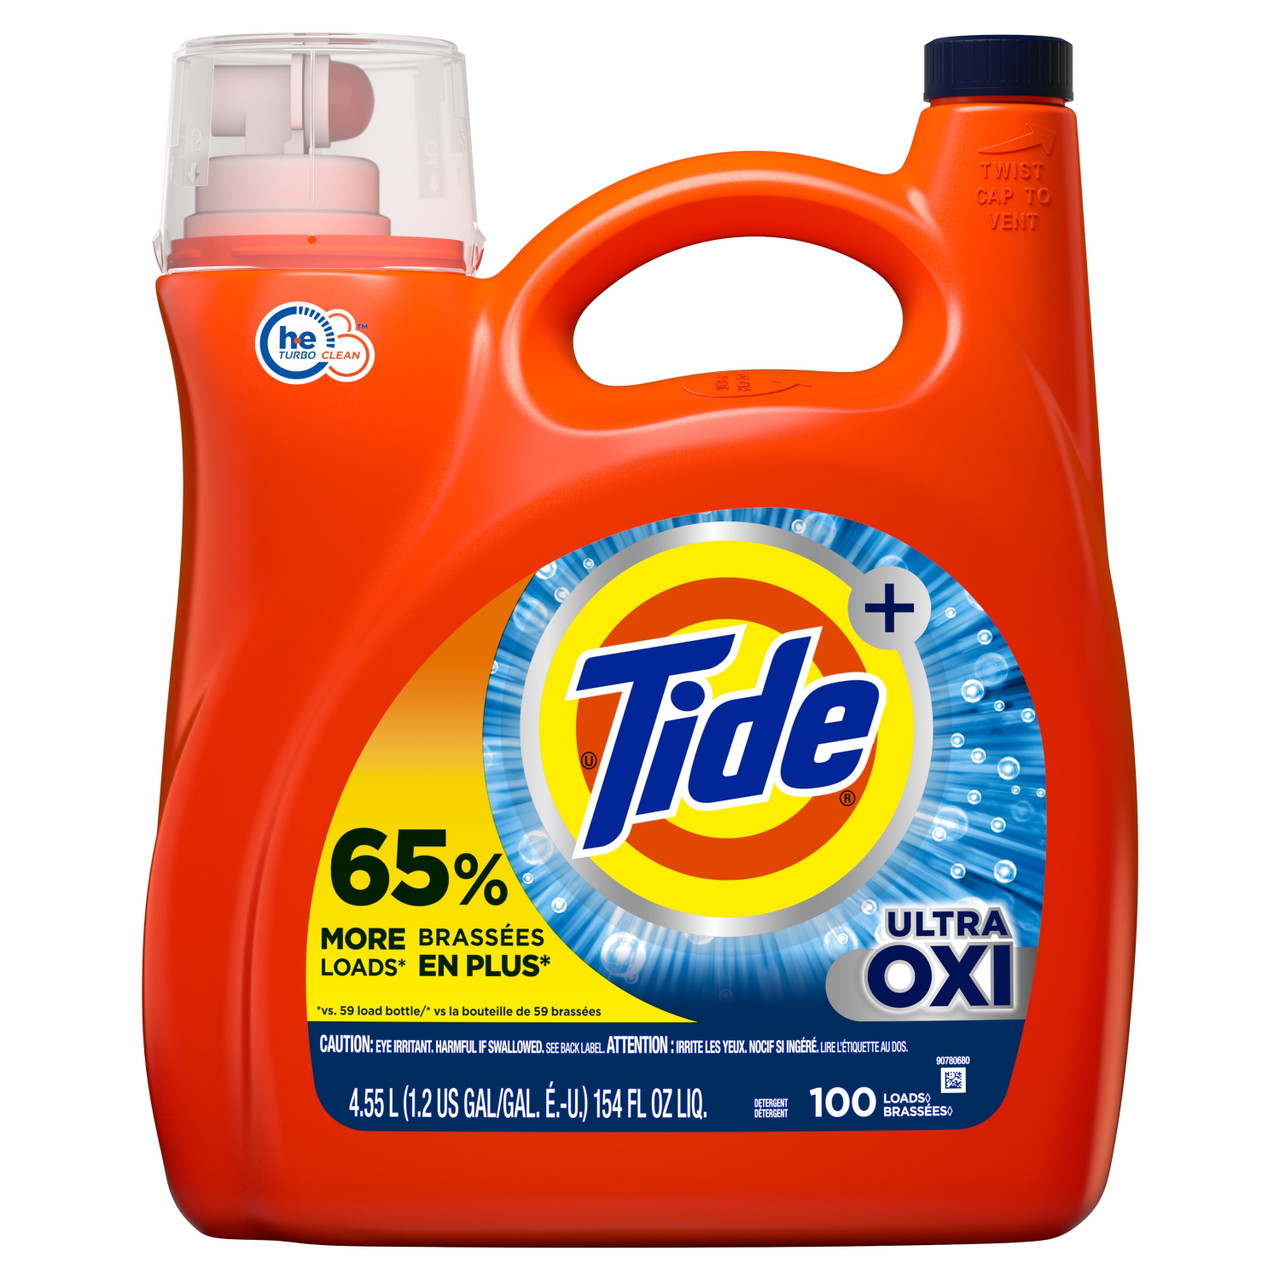 Tide Ultra Plus Oxi, 100 Loads Liquid Laundry Detergent, 154 fl oz - [From 128.00 - Choose pk Qty ] - *Ships from Miami